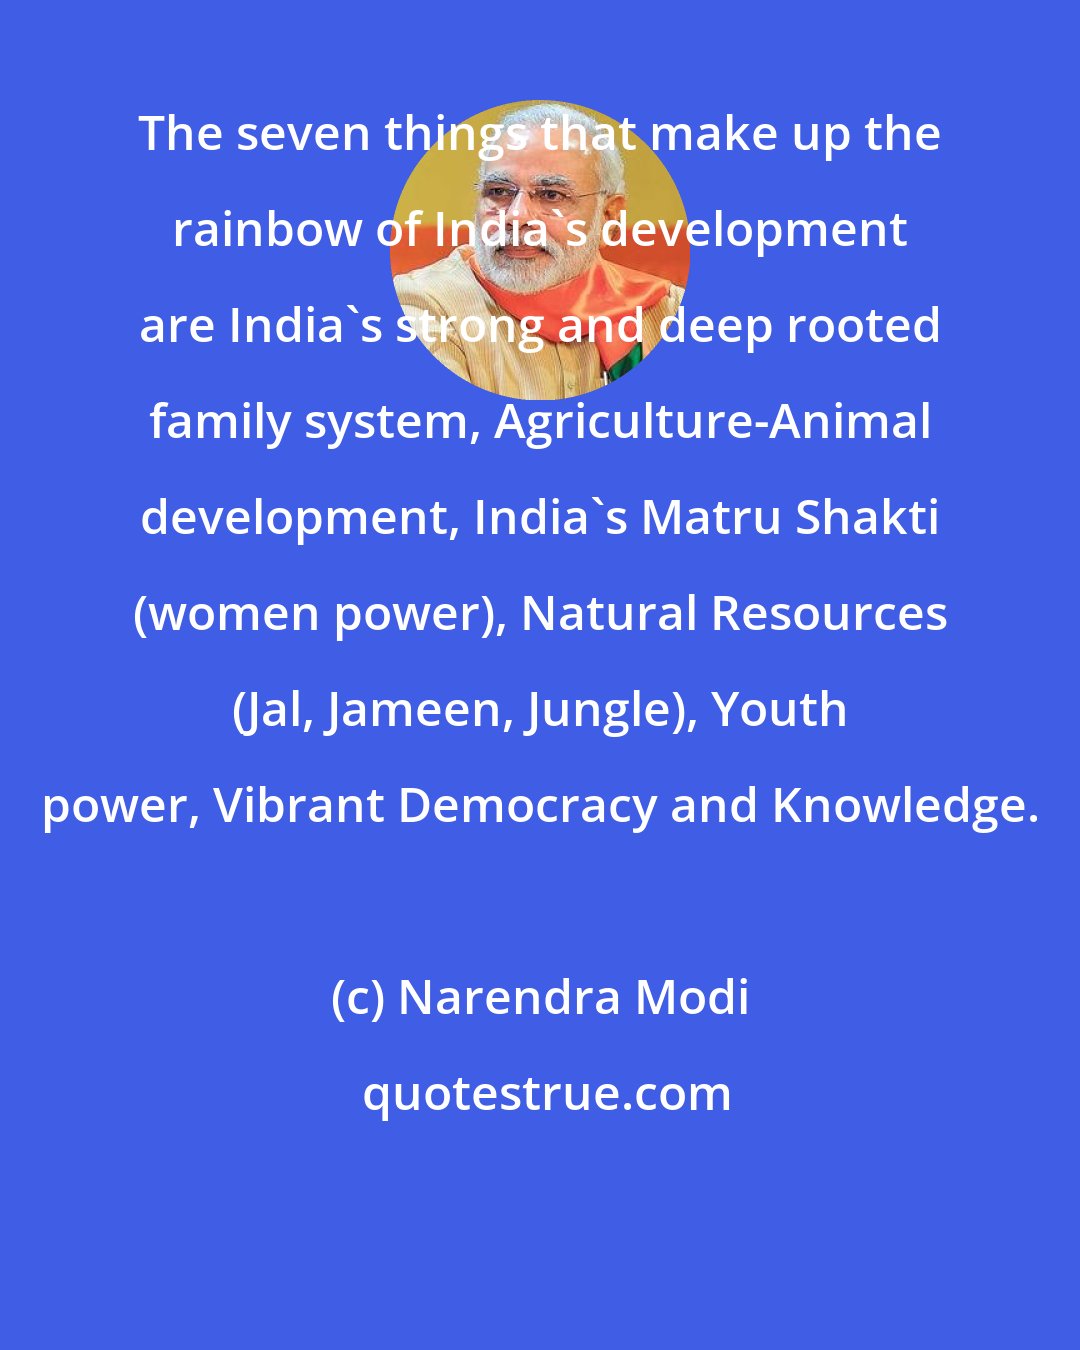 Narendra Modi: The seven things that make up the rainbow of India's development are India's strong and deep rooted family system, Agriculture-Animal development, India's Matru Shakti (women power), Natural Resources (Jal, Jameen, Jungle), Youth power, Vibrant Democracy and Knowledge.